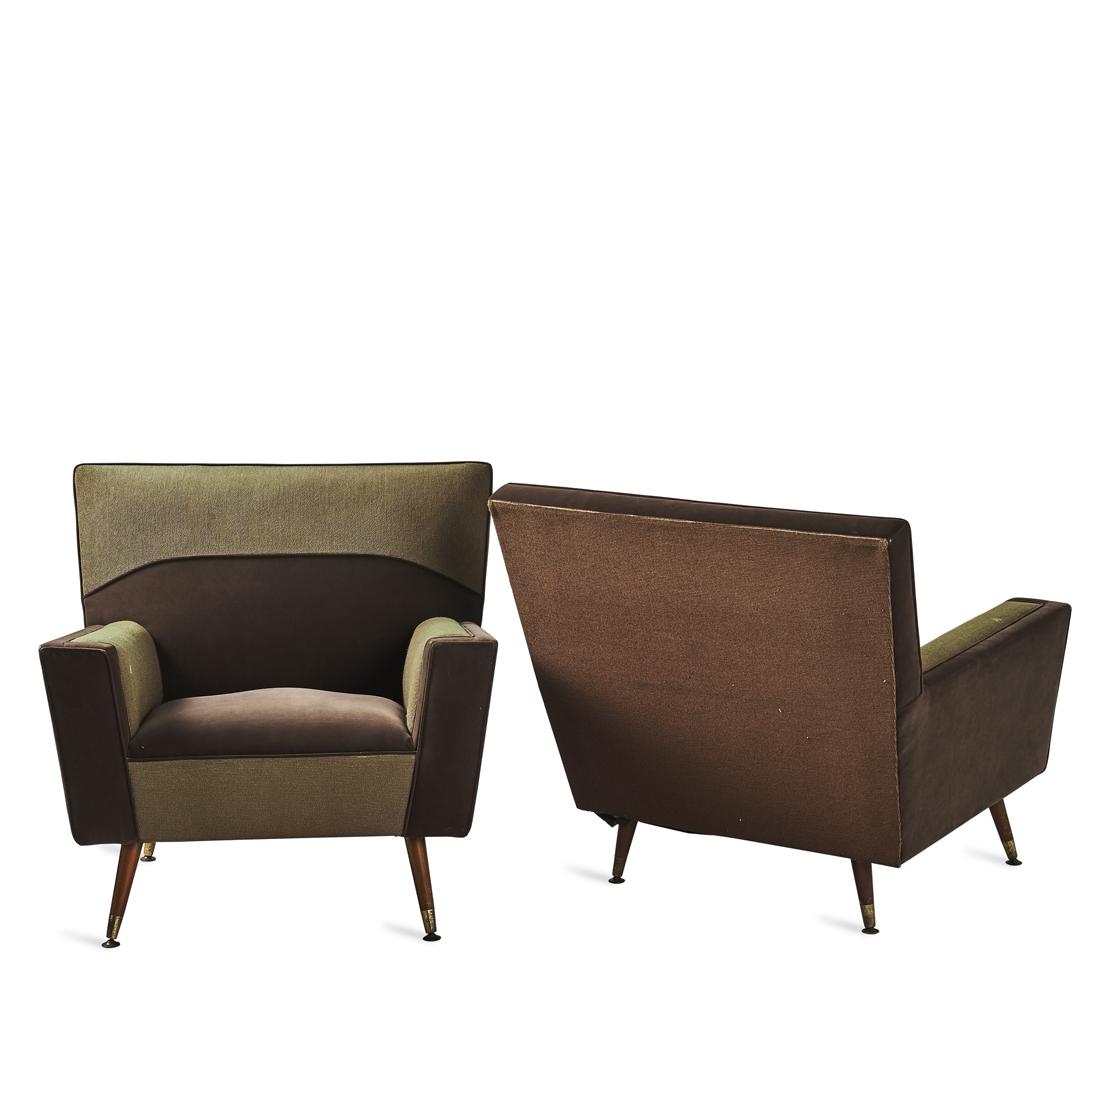 A Pair of Lounge Chairs - Price Estimate: $900 - $1200